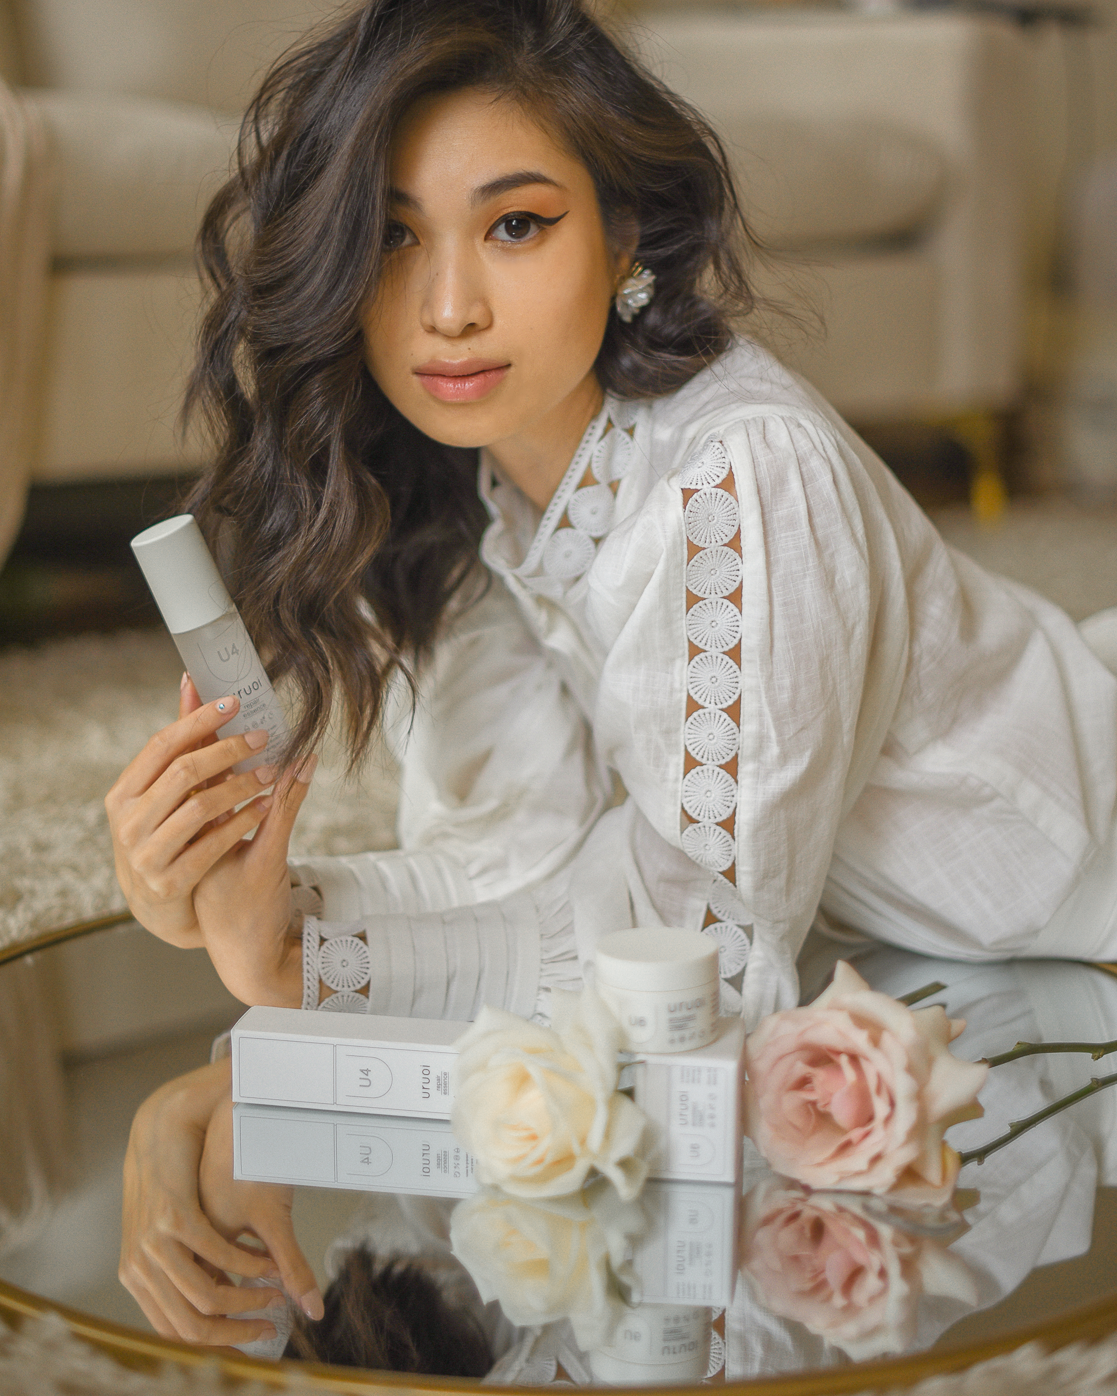 Floral beauty self-portrait, Uruoi Skincare - DENKA PURE HYALURONIC ACID TM, U-Series spring collaboration with blogger @forevervanny. Japanese clean beauty brand.